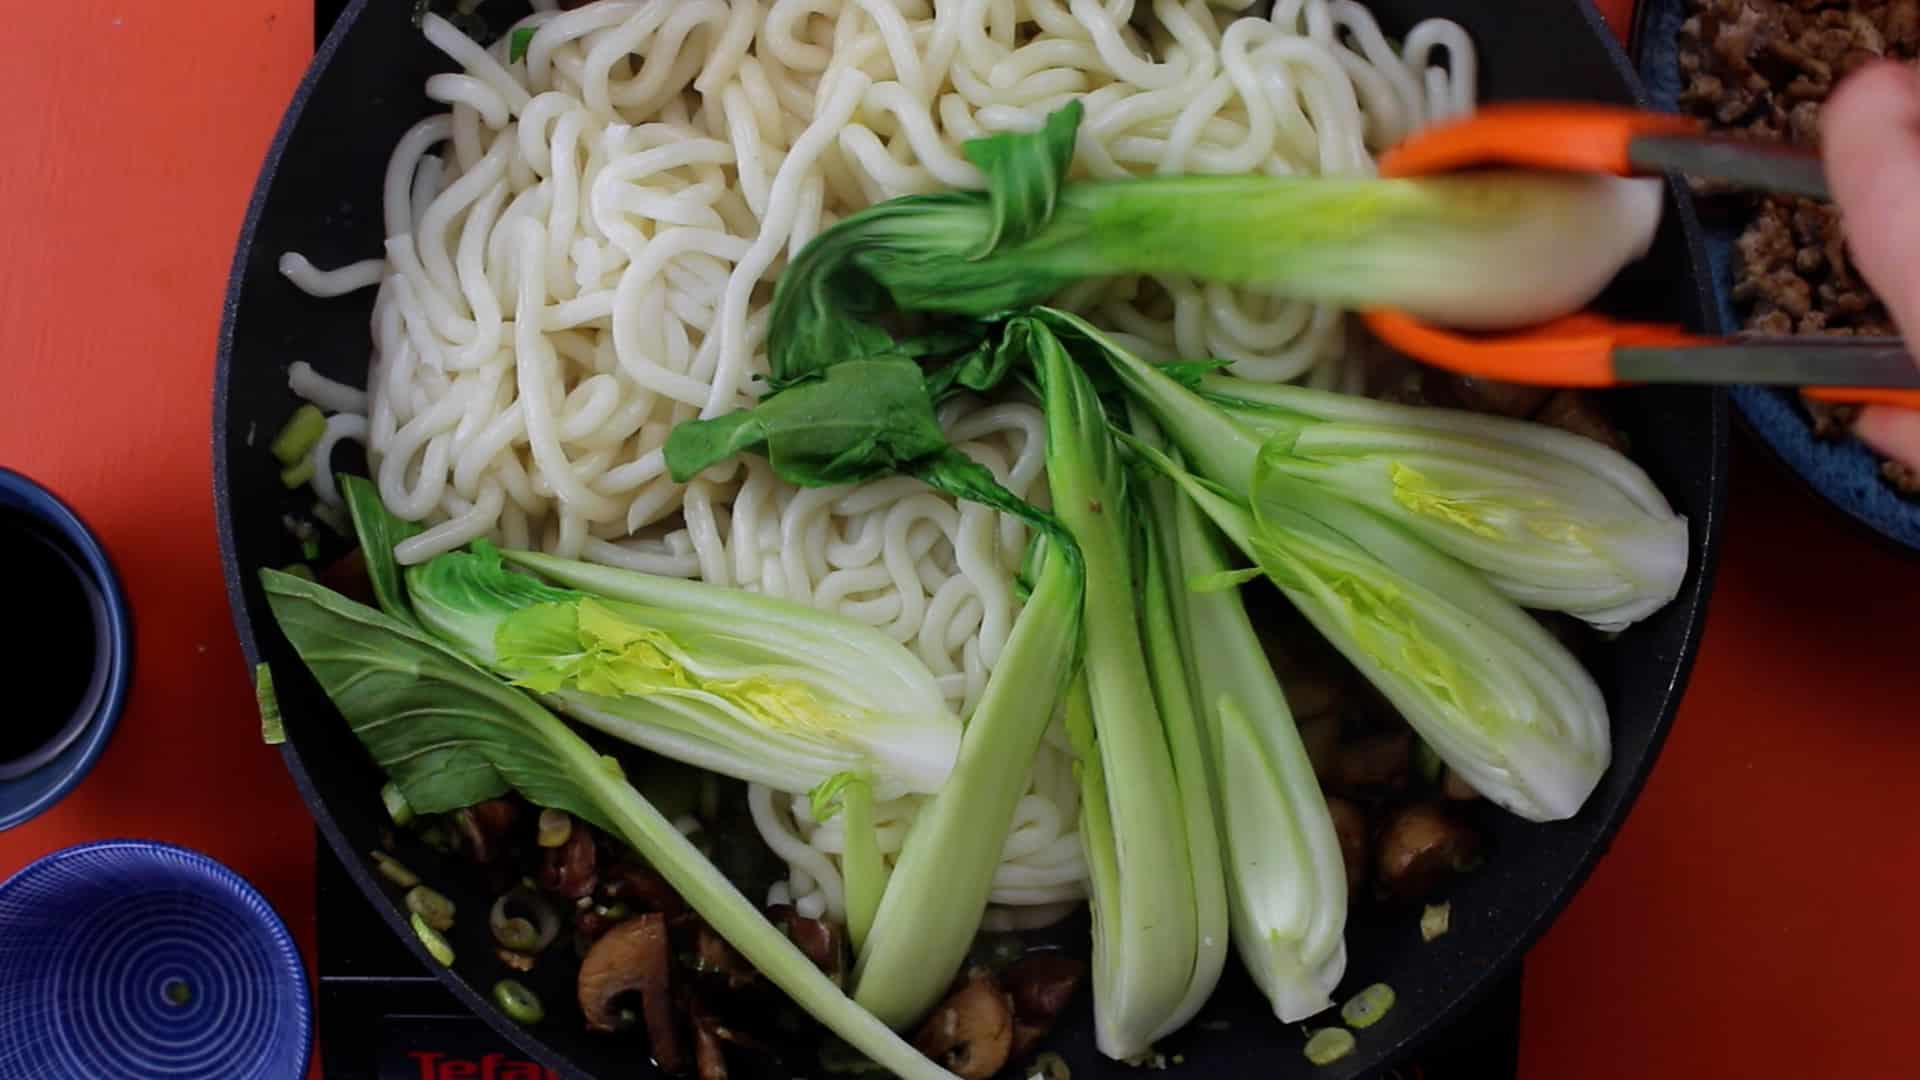 Pak choi slices over the udon noodles in the pan with mushrooms and spring onions with orange tongs moving the pak choi.